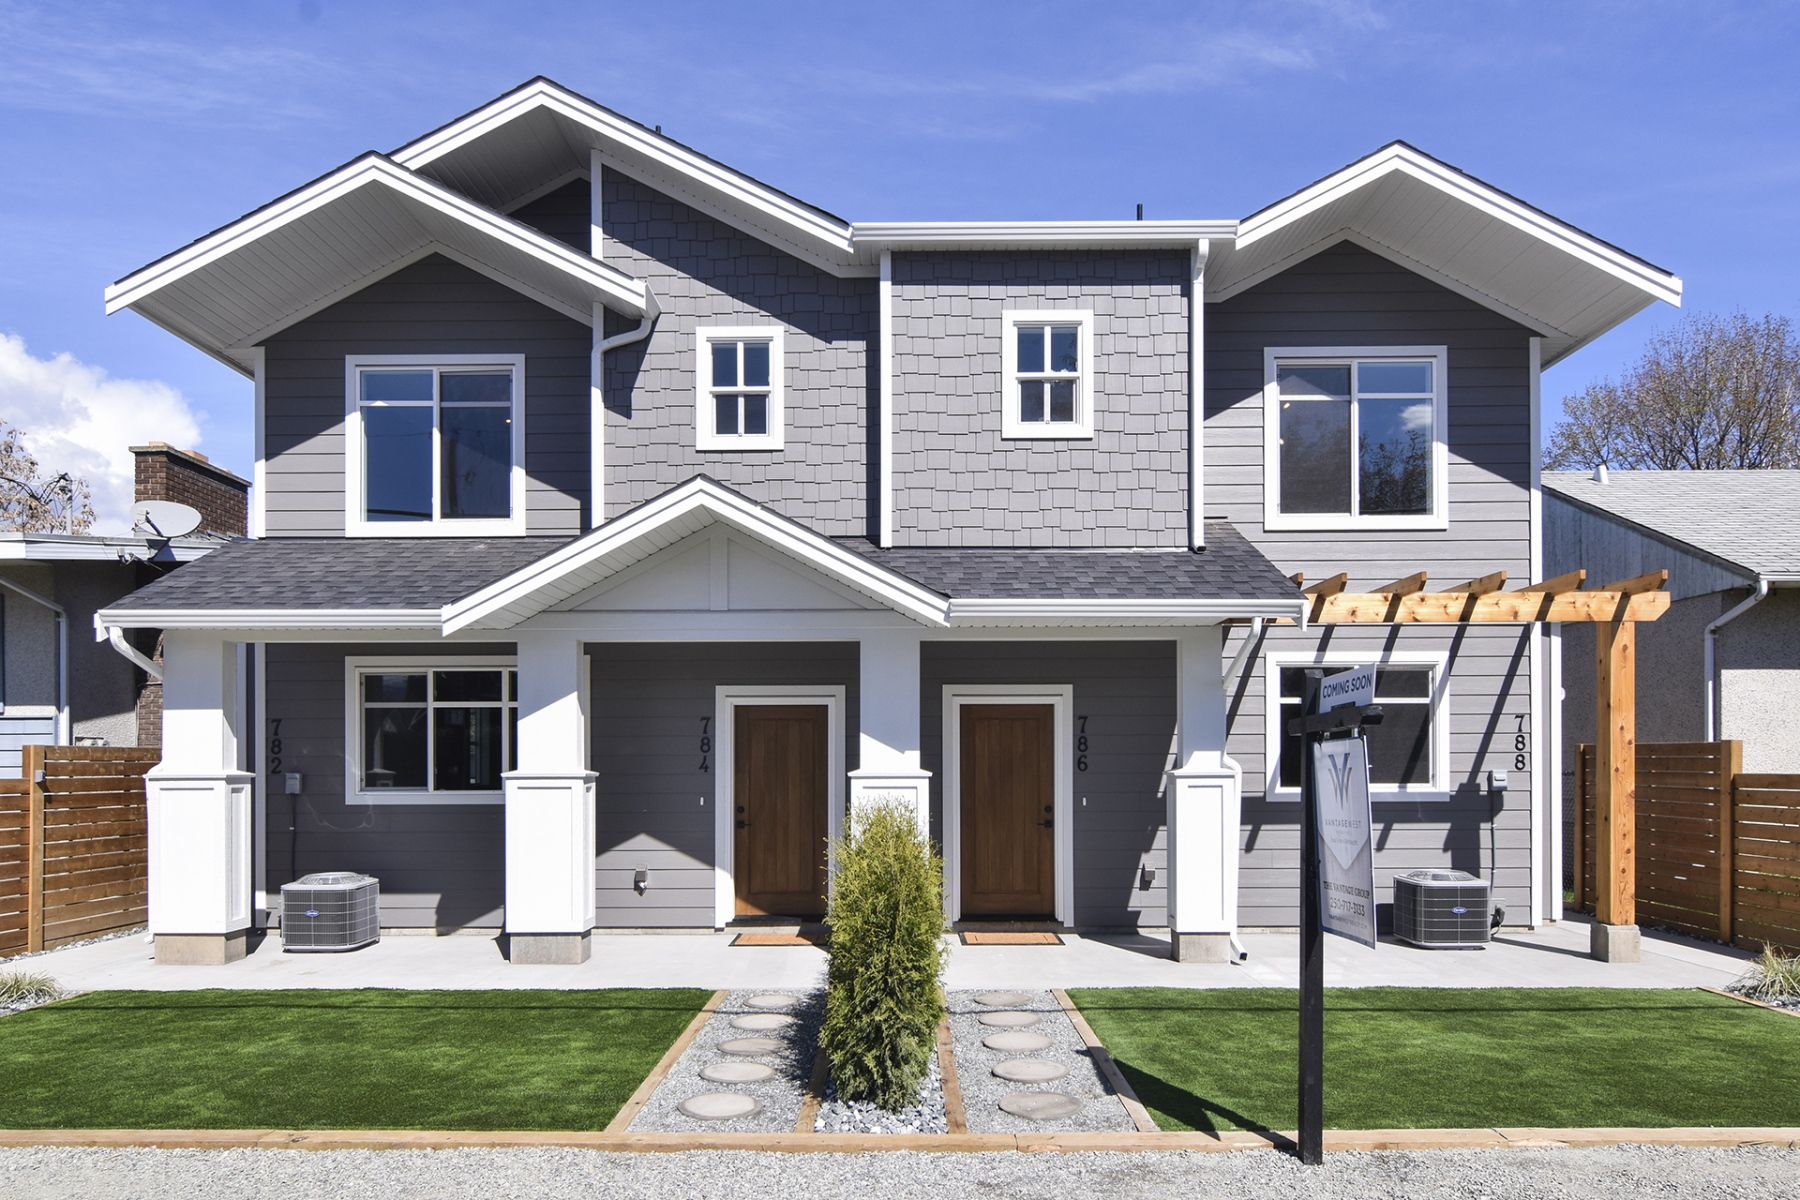 harmony_homes_glenwood_infill_project_front_view_gallery_image_1.jpg